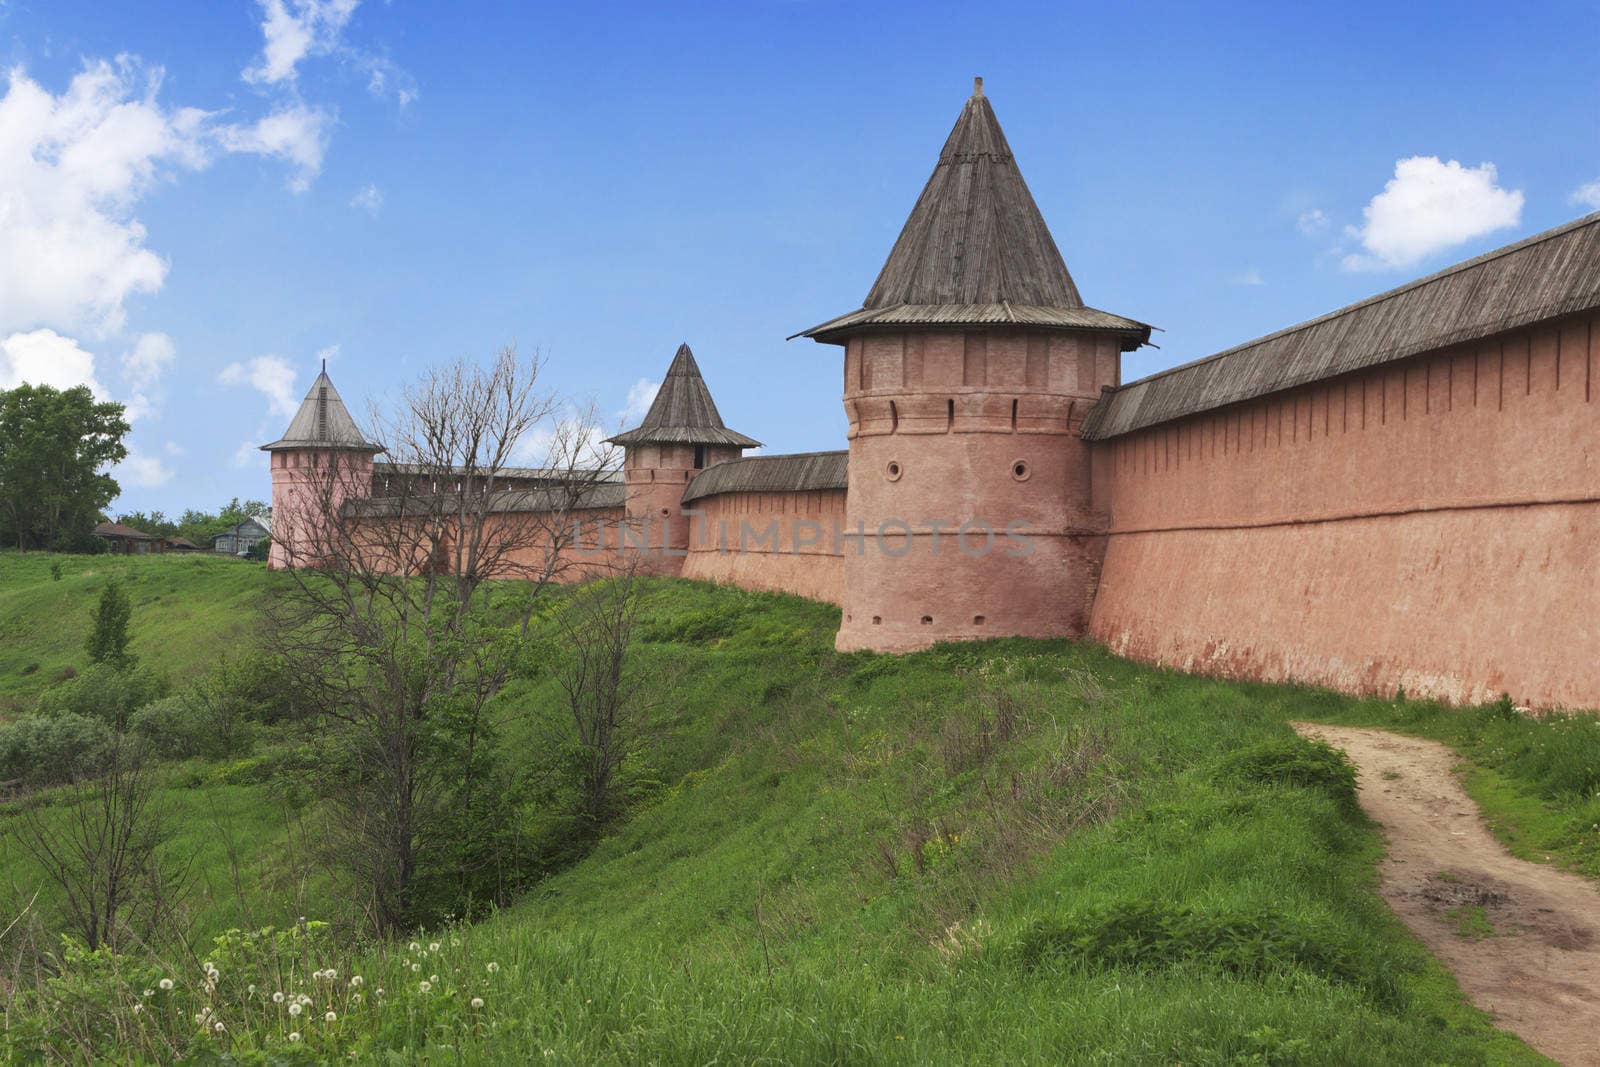 The ancient Kremlin walls in the city of Suzdal